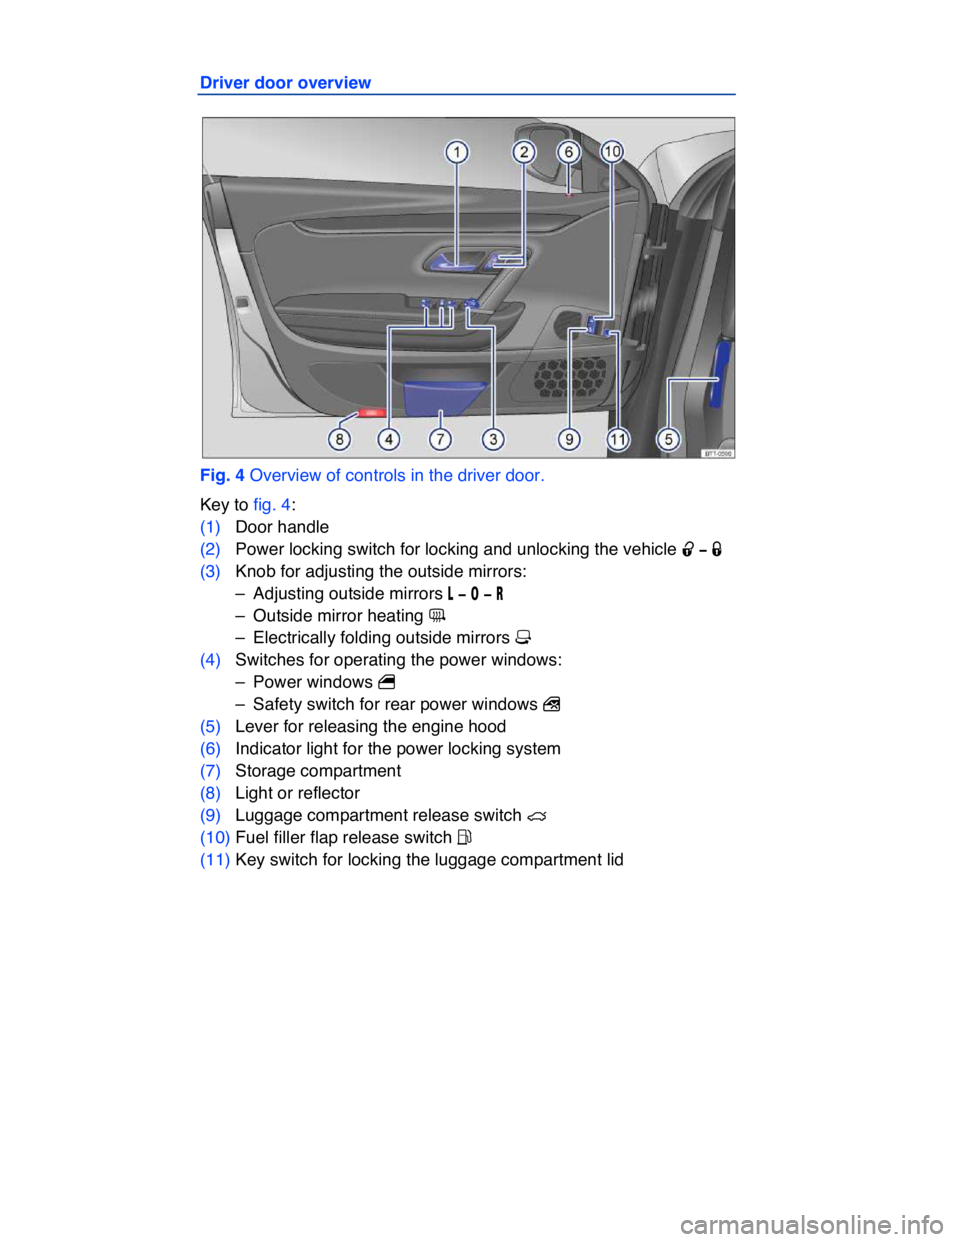 VOLKSWAGEN CC 2014  Owners Manual  
Driver door overview 
 
Fig. 4 Overview of controls in the driver door. 
Key to fig. 4: 
(1) Door handle  
(2) Power locking switch for locking and unlocking the vehicle �0 �